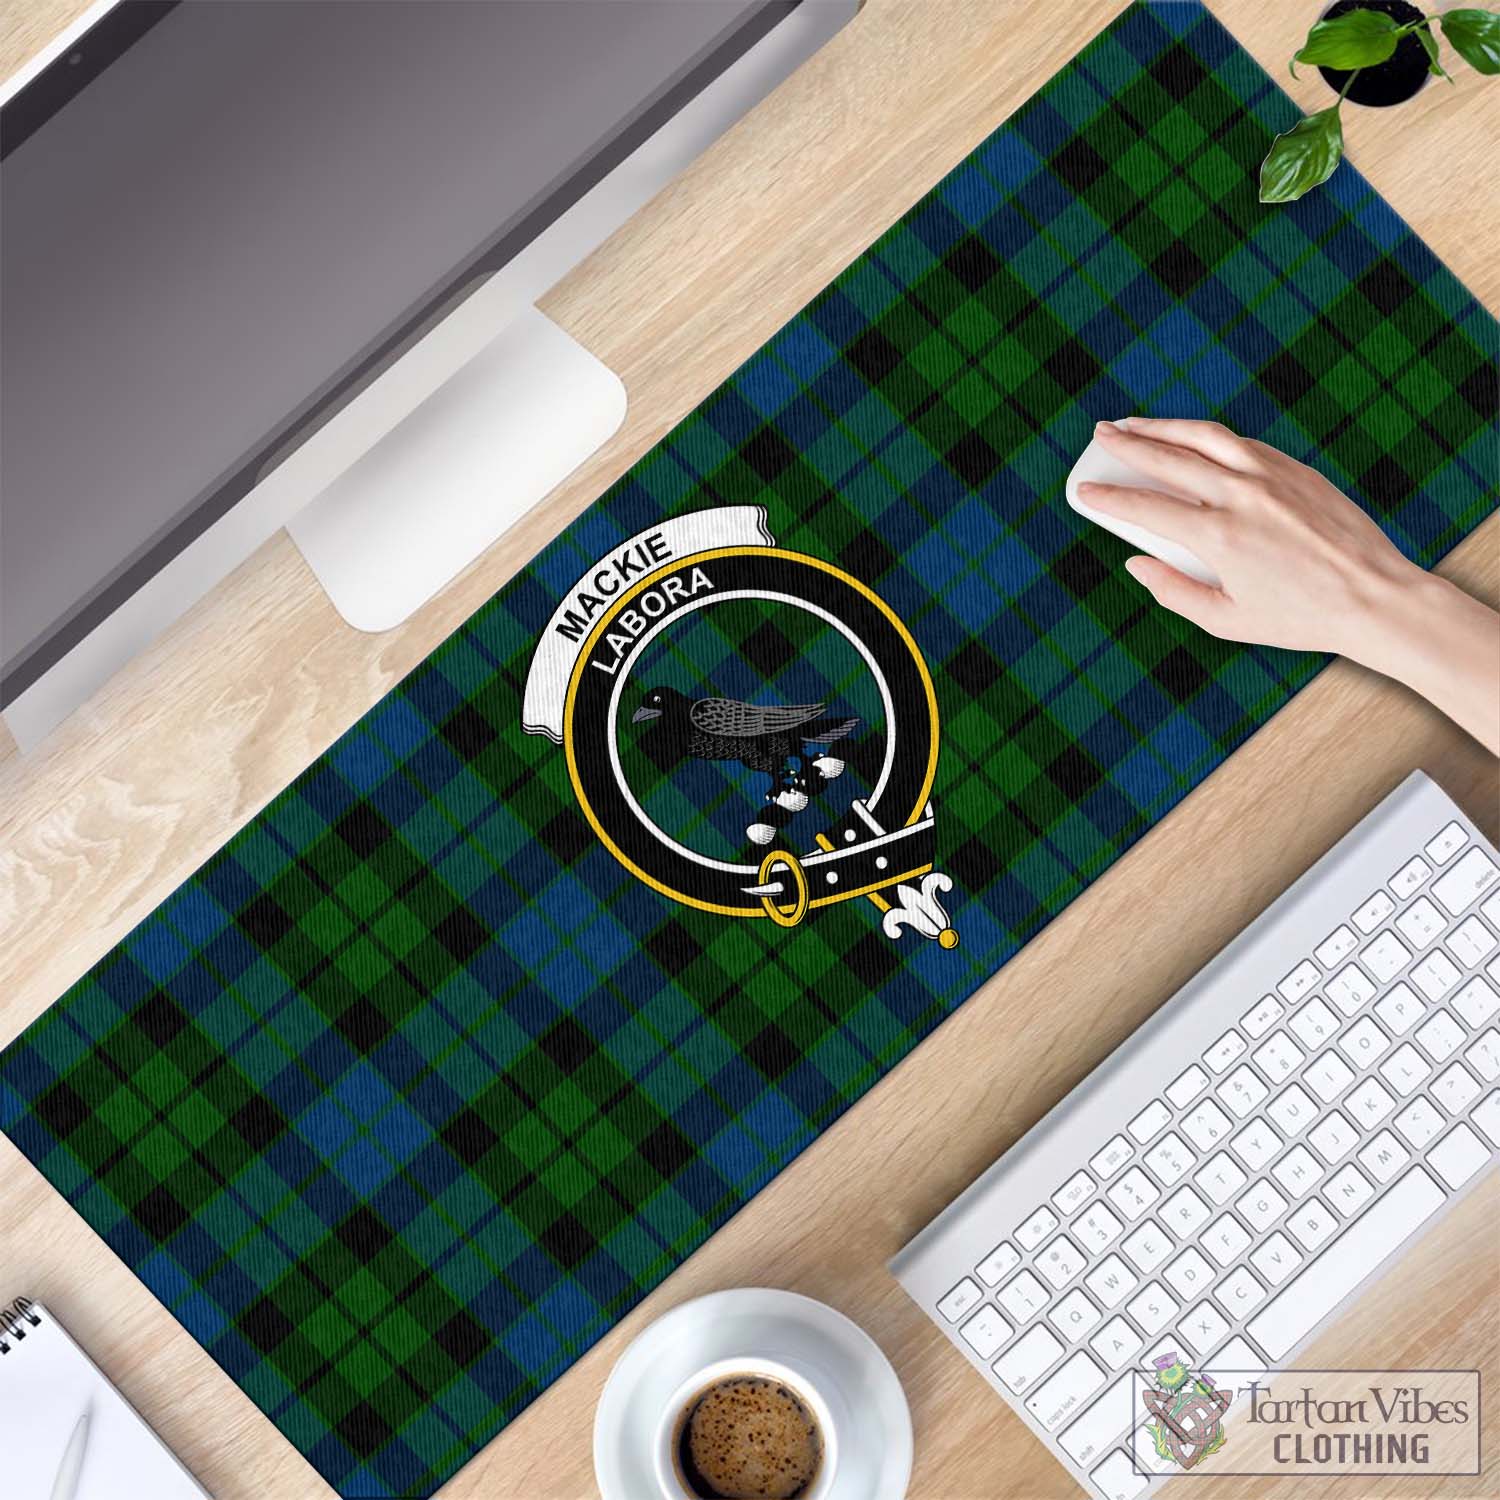 Tartan Vibes Clothing MacKie Tartan Mouse Pad with Family Crest